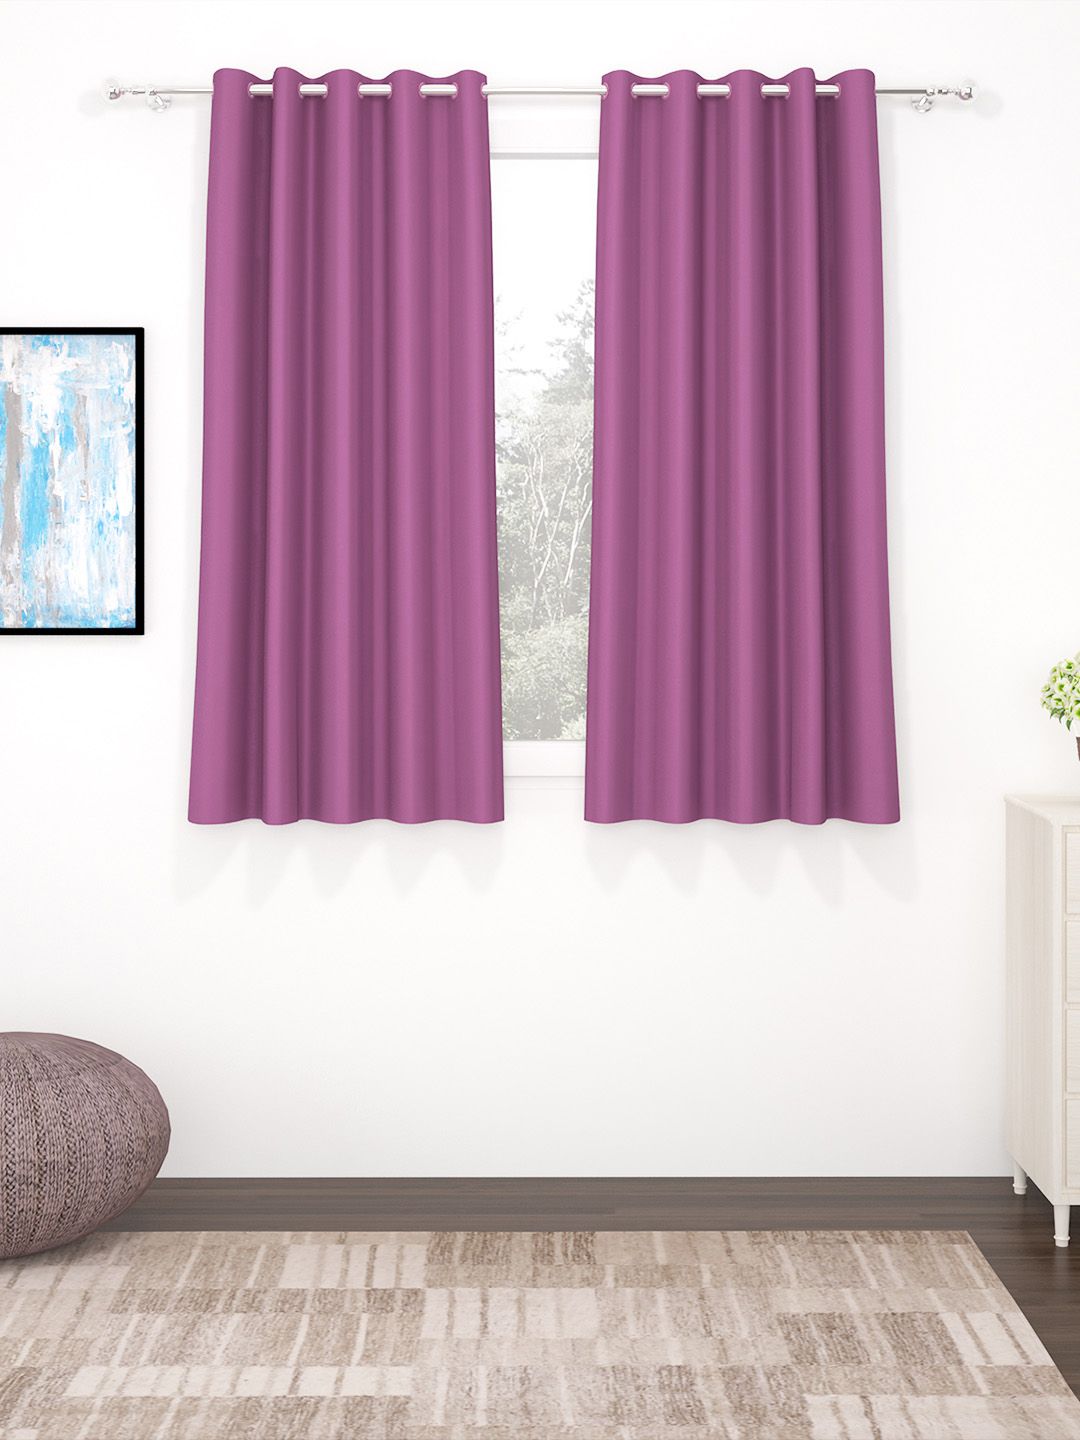 Story@Home Faux Silk Solid Solid 300GSM Lavender Room Darkening Blackout Window Curtain - Set of 2 Price in India